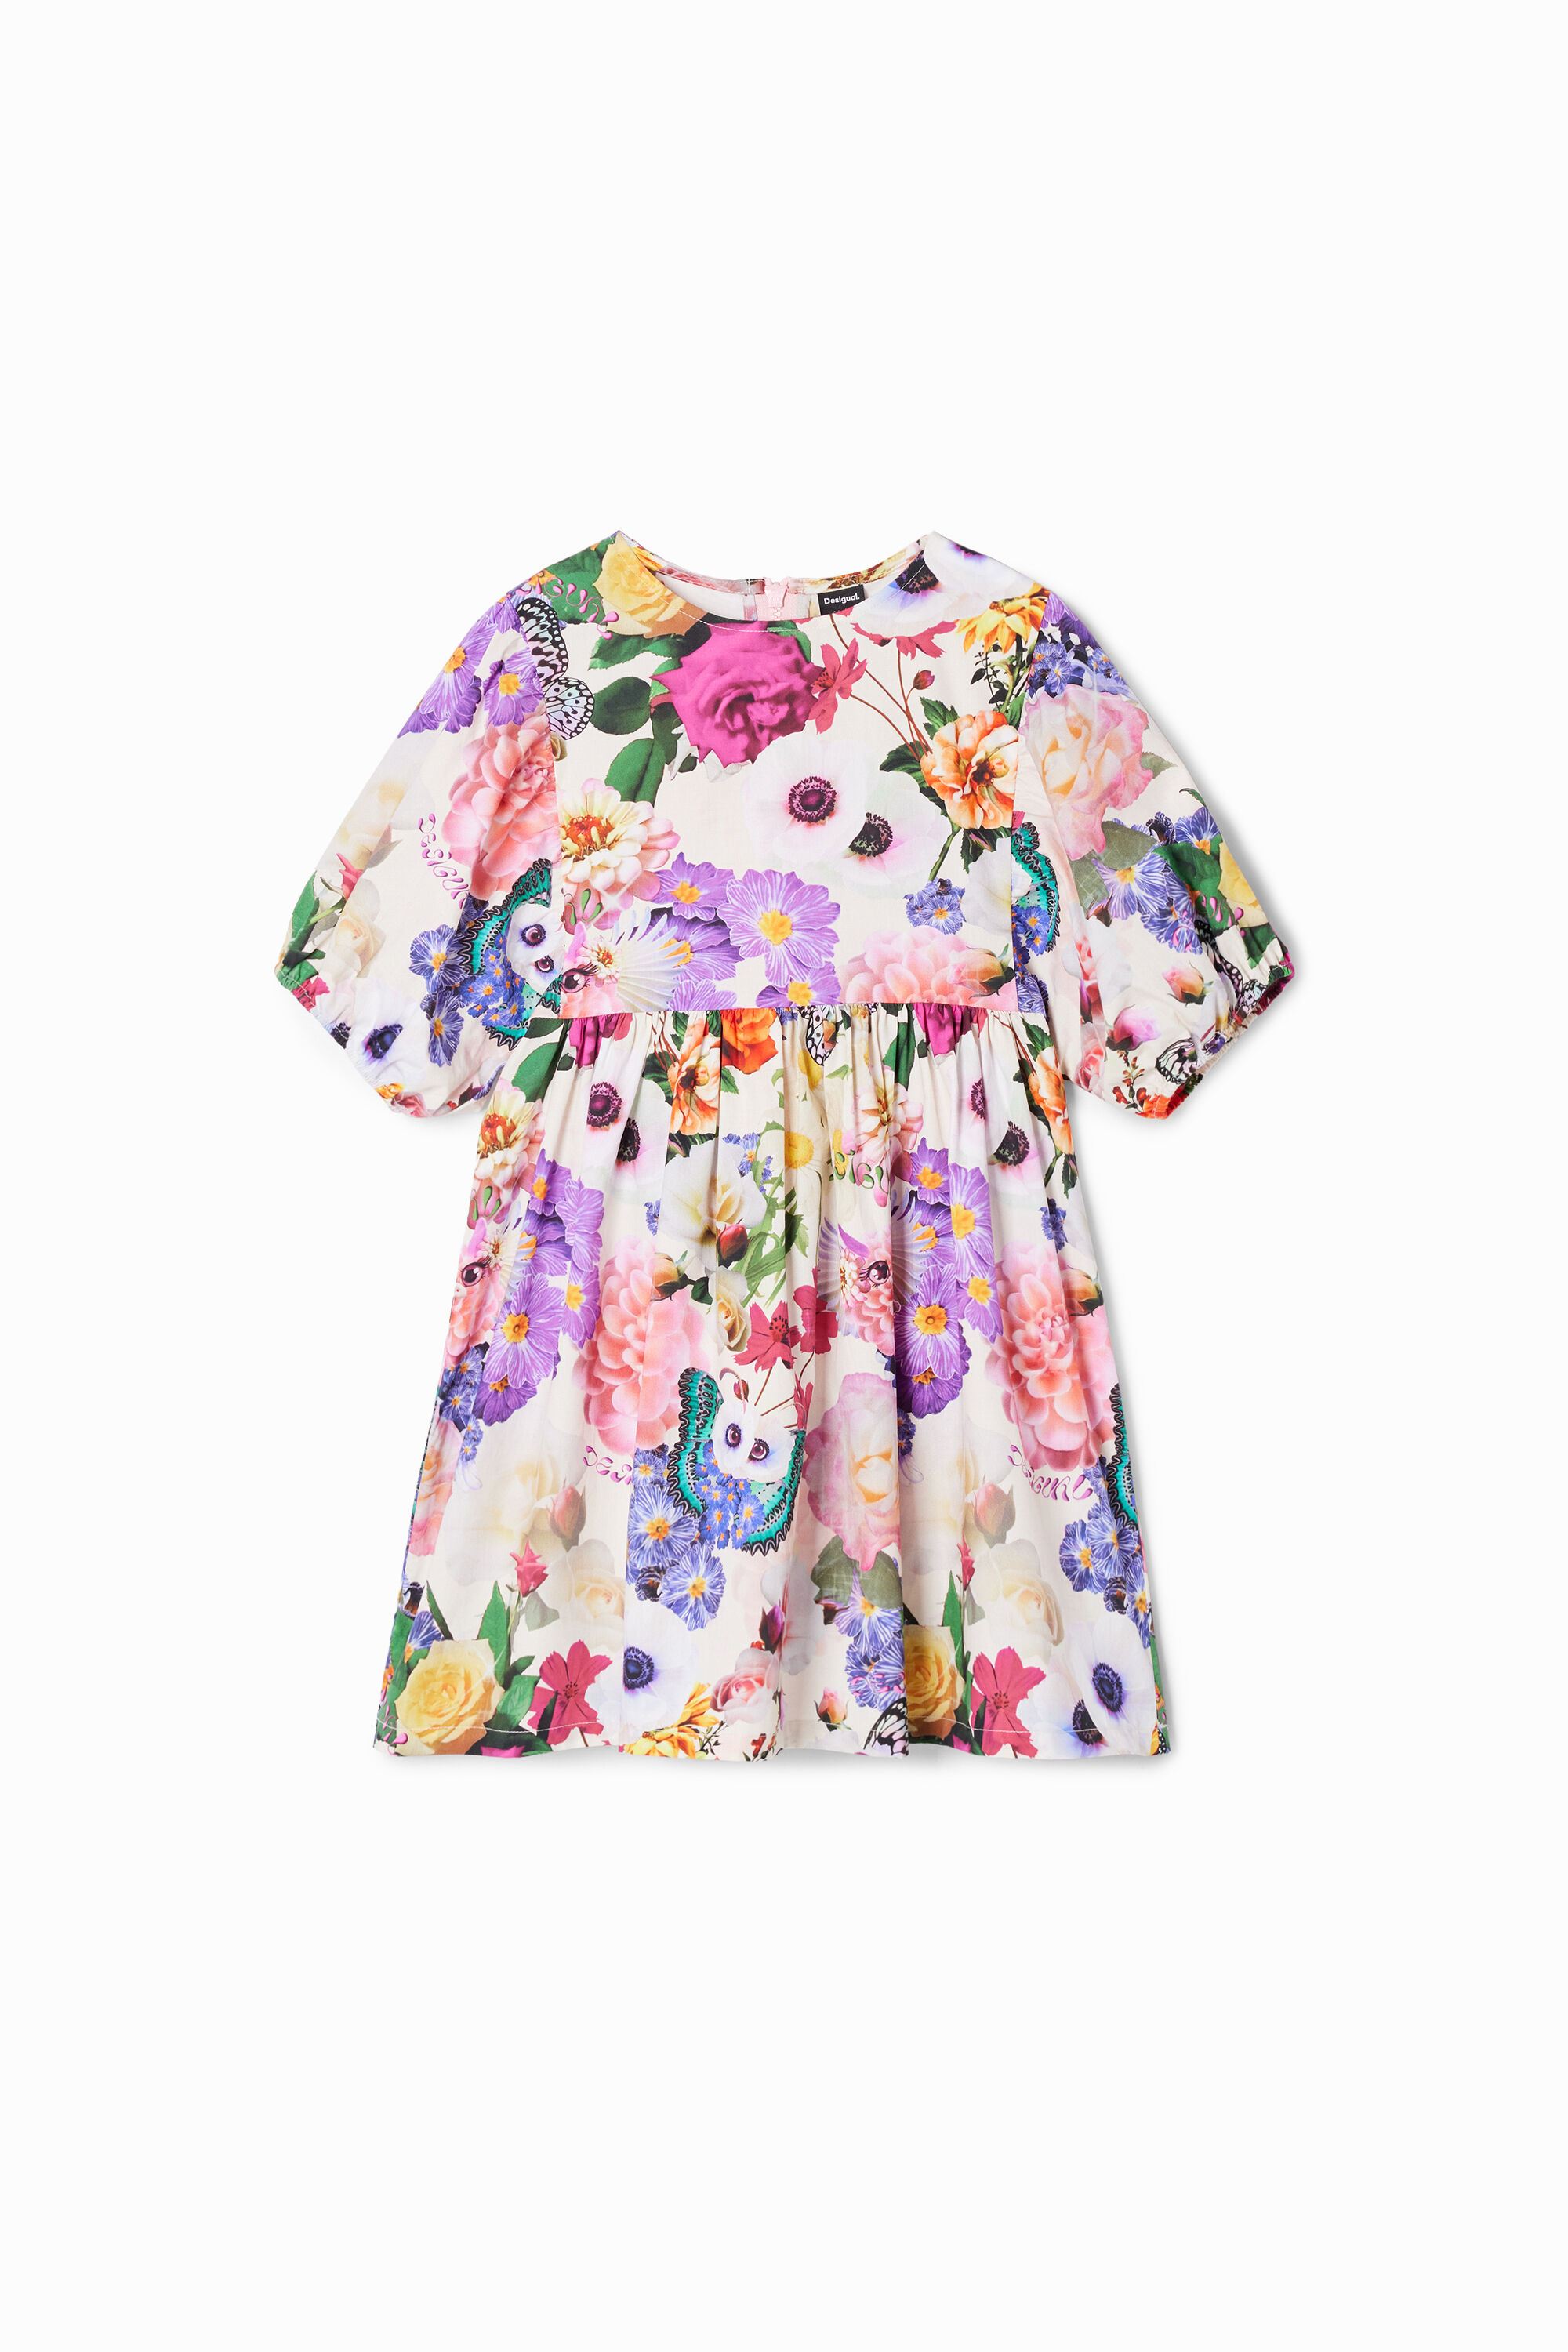 A-line floral dress - MATERIAL FINISHES - 5/6